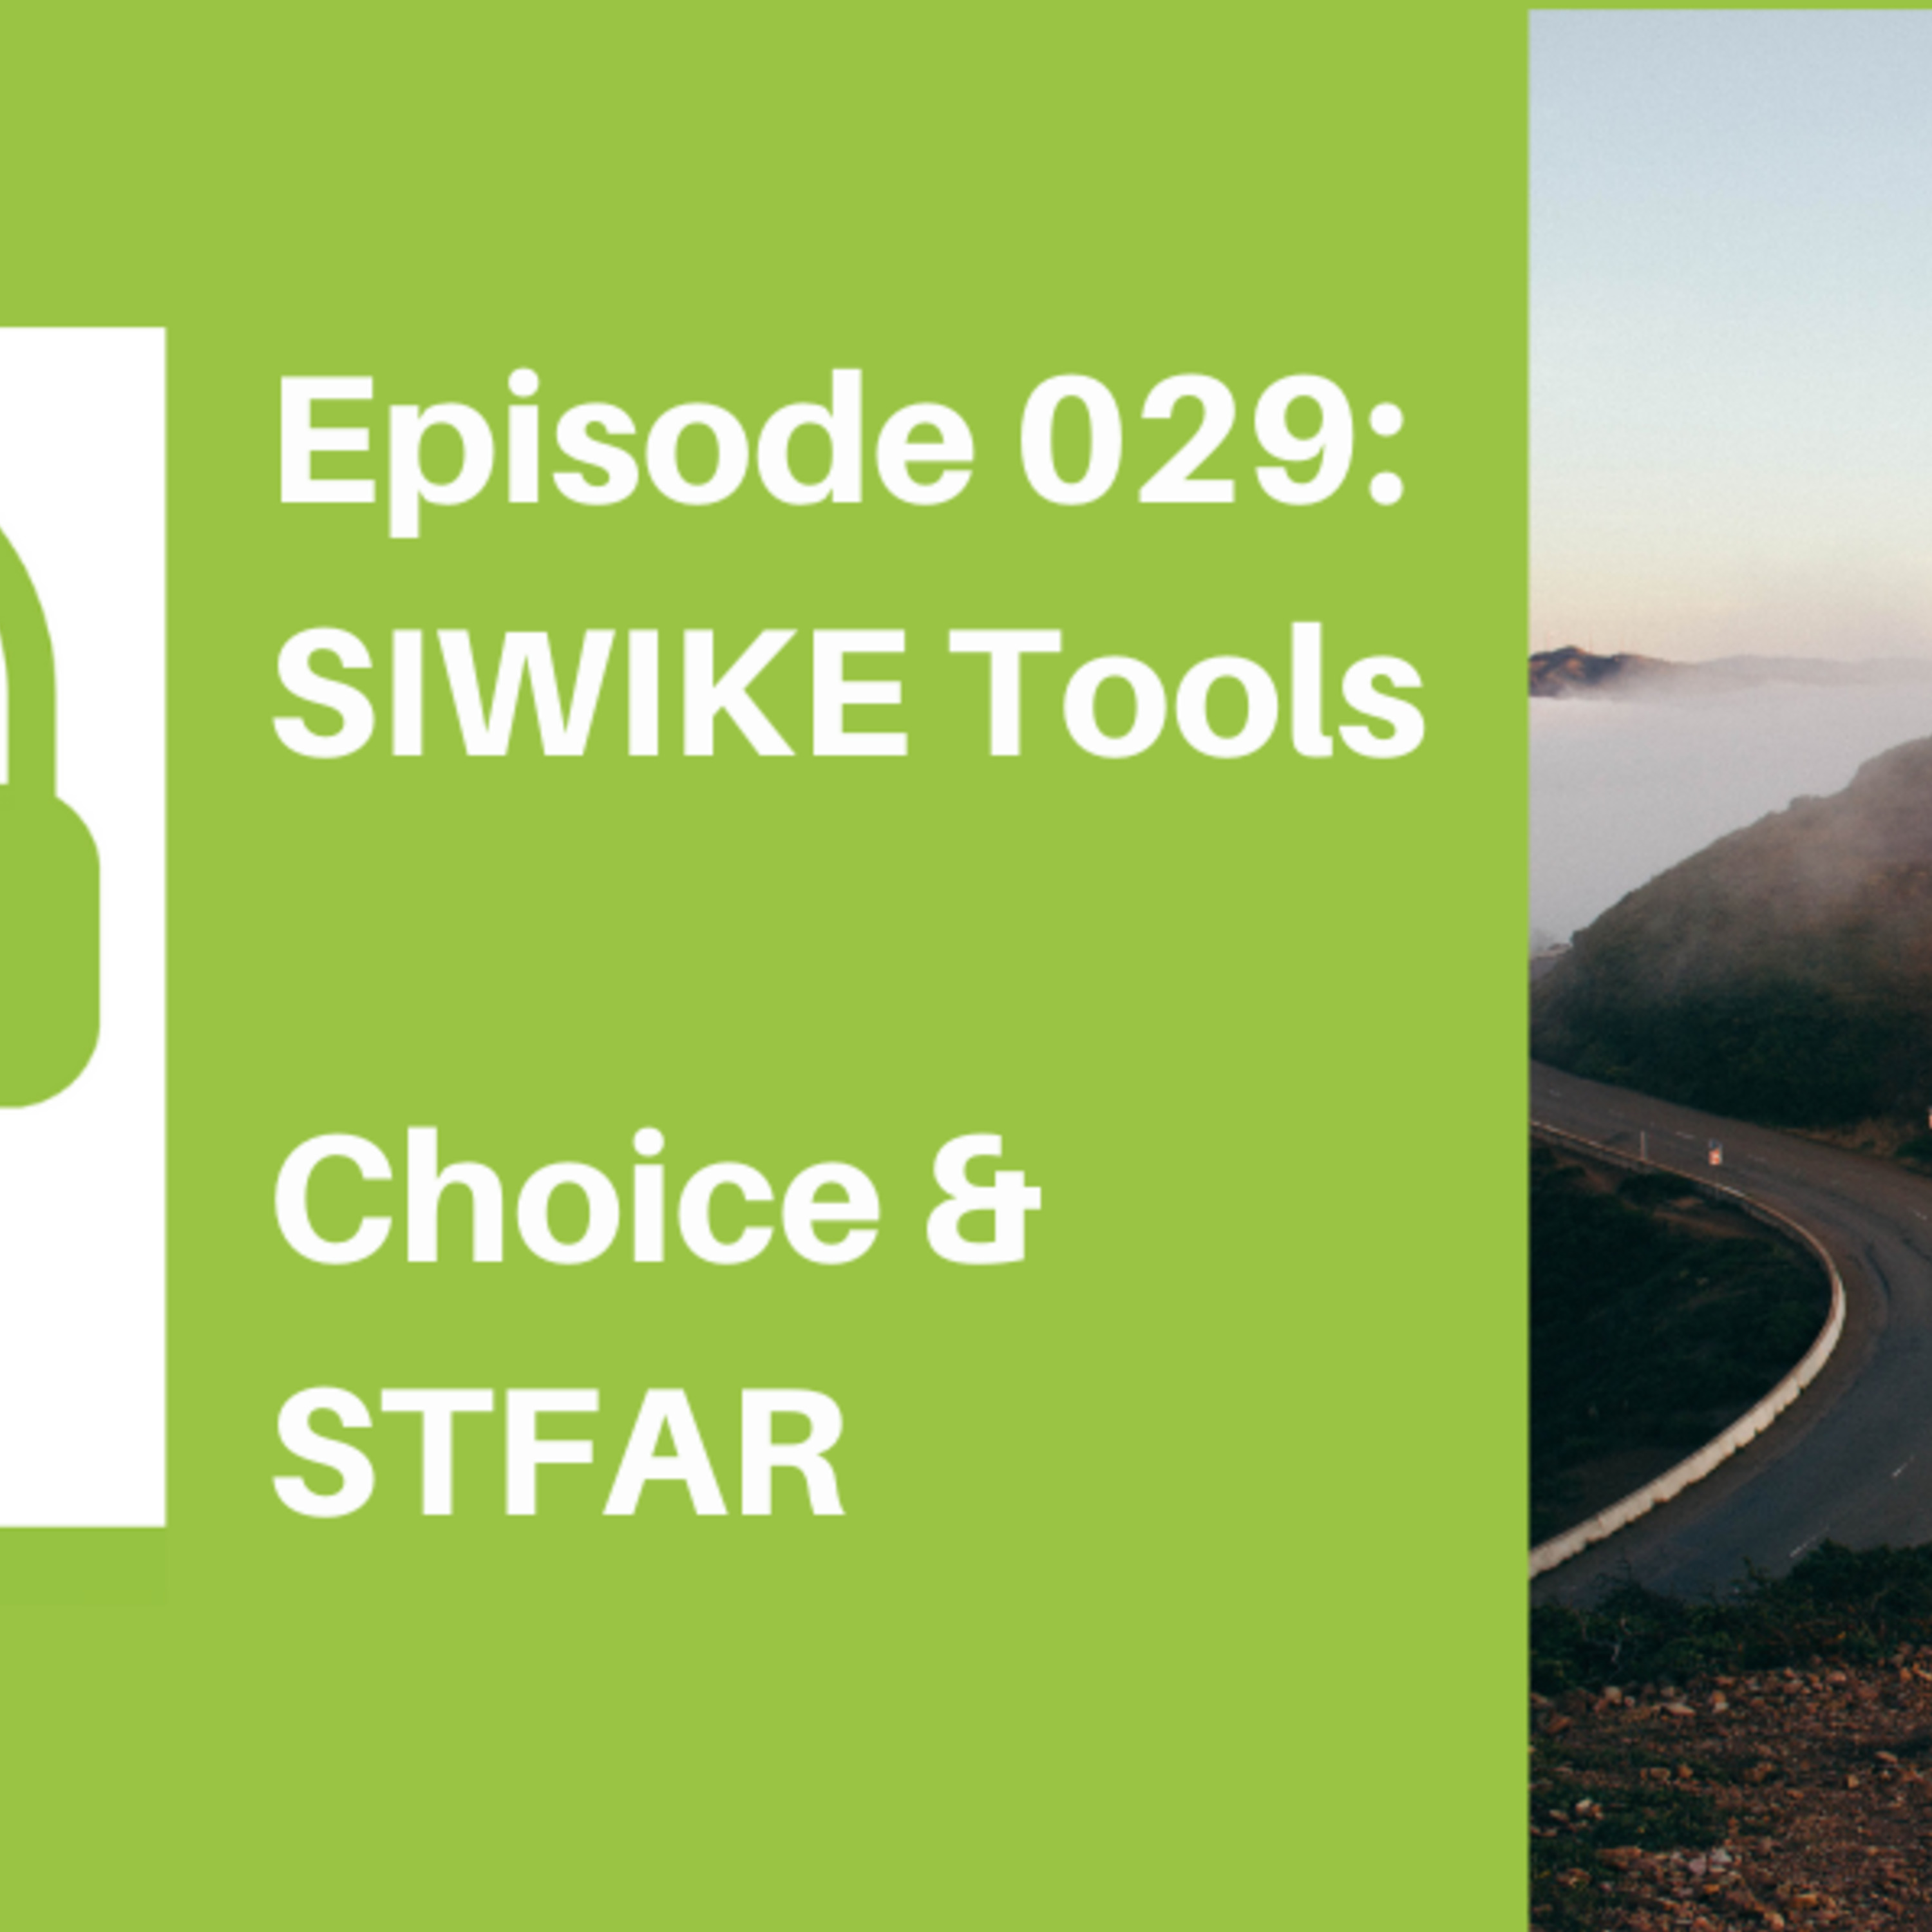 Episode 029: SIWIKE Tools: Choice and the STFAR method